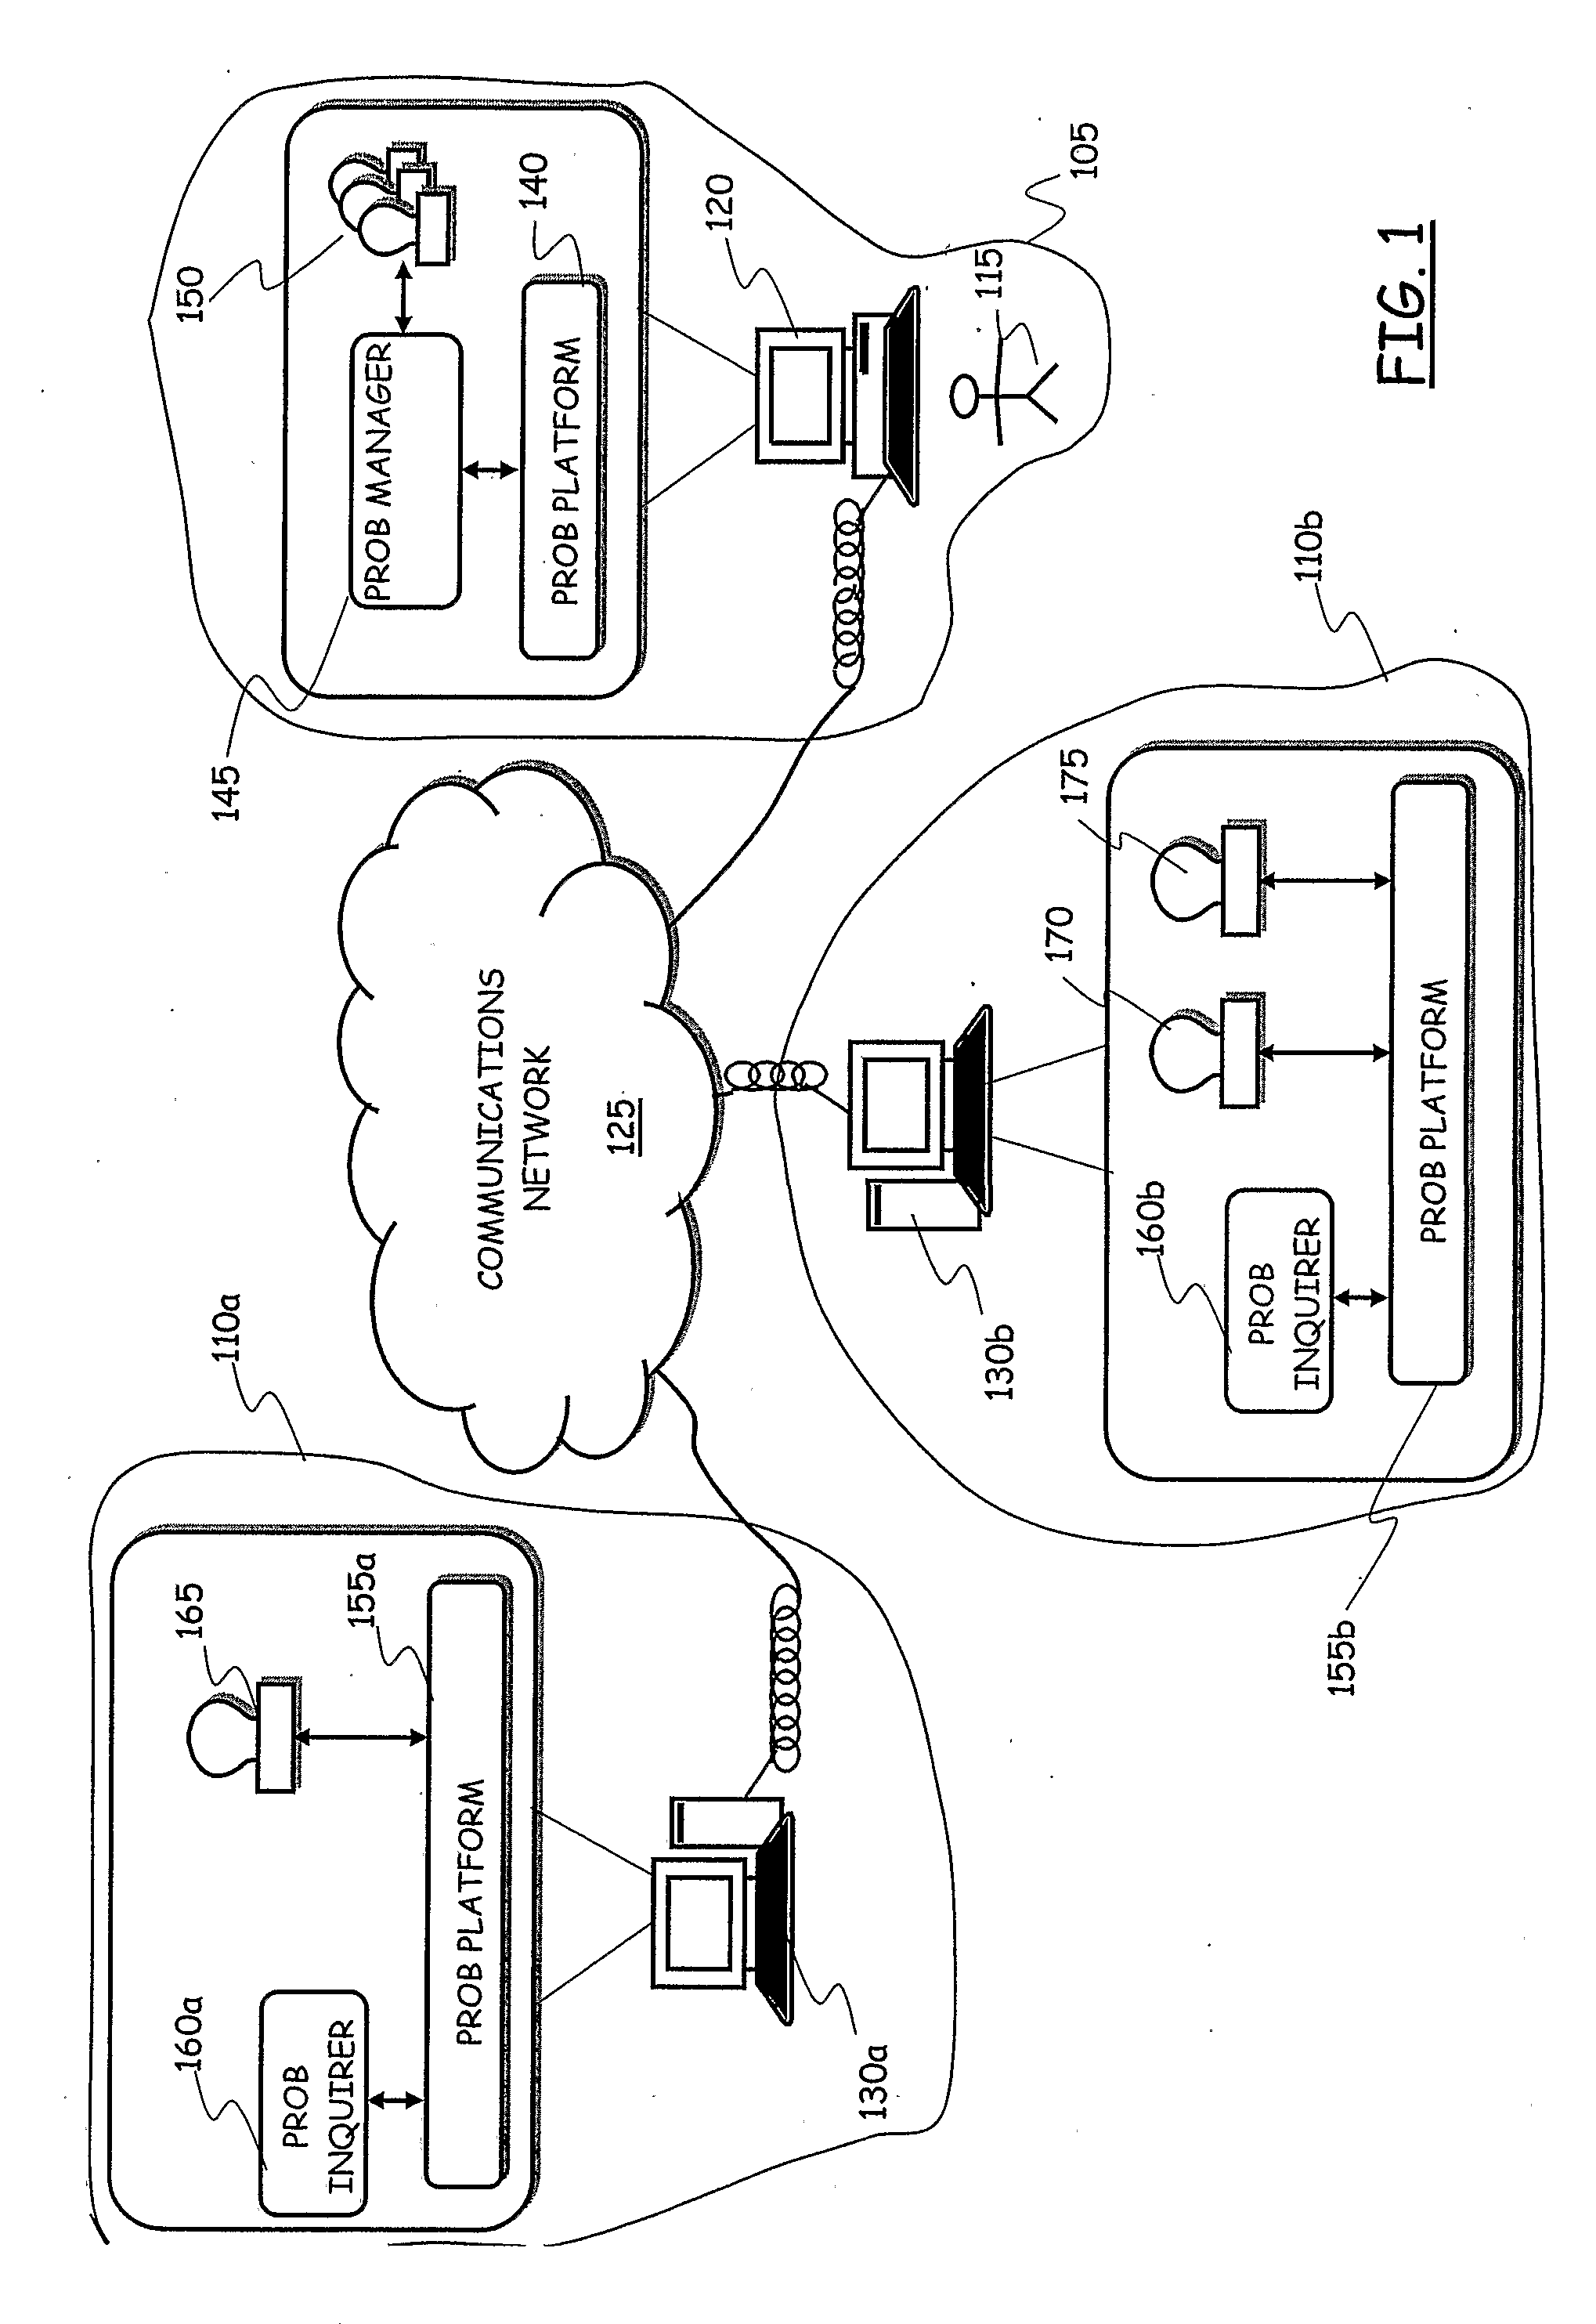 Method and System for Protected Distribution of Digitalized Sensitive Information